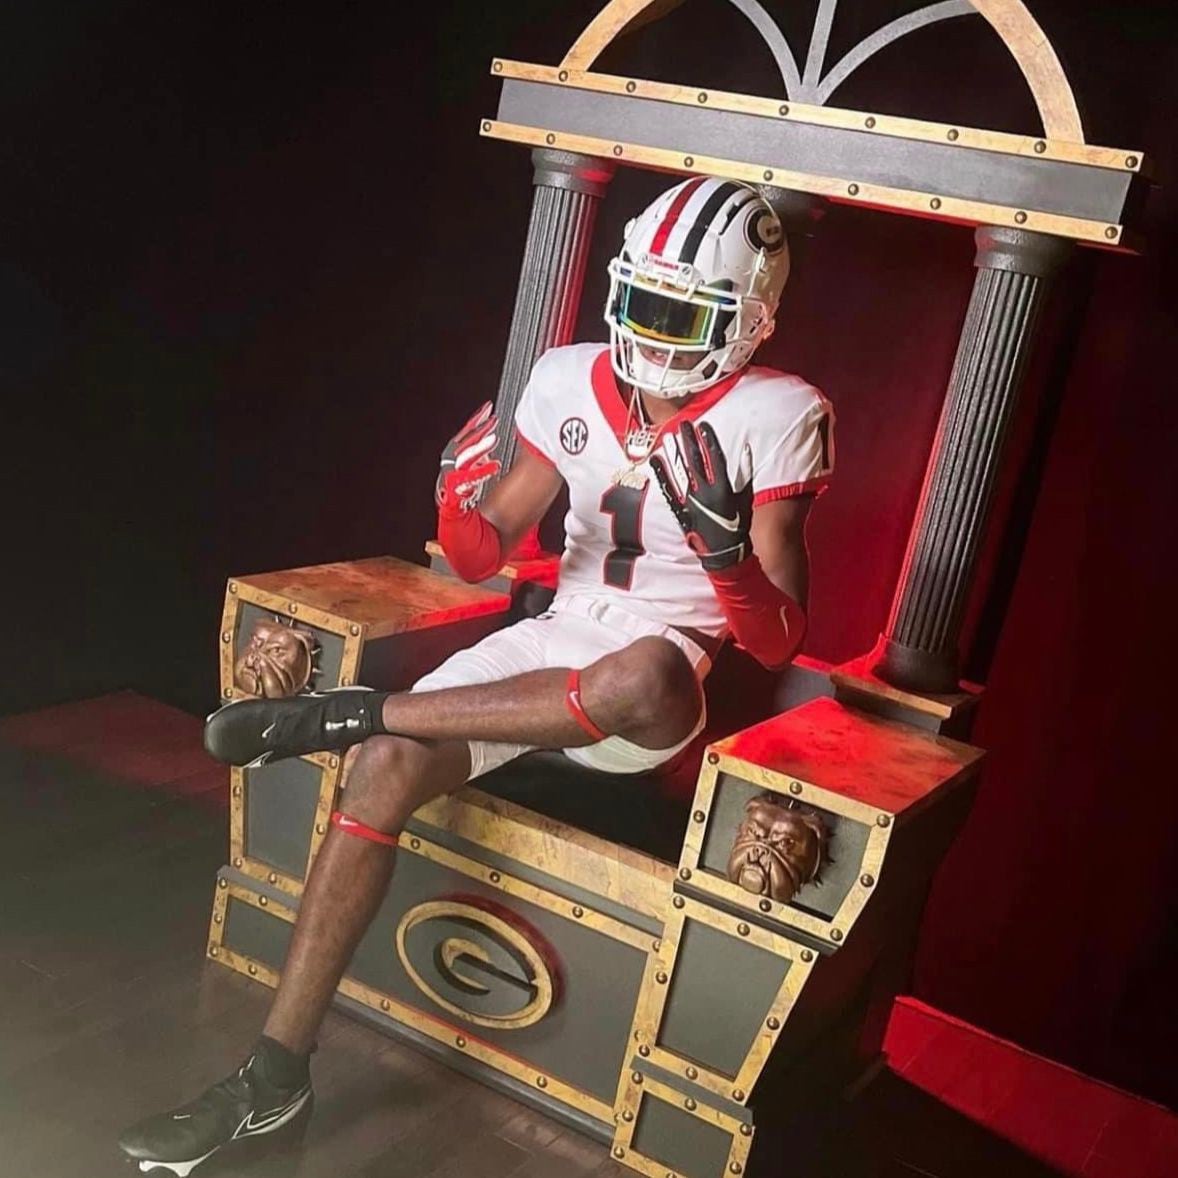 New Georgia football uniforms and logo only slightly different